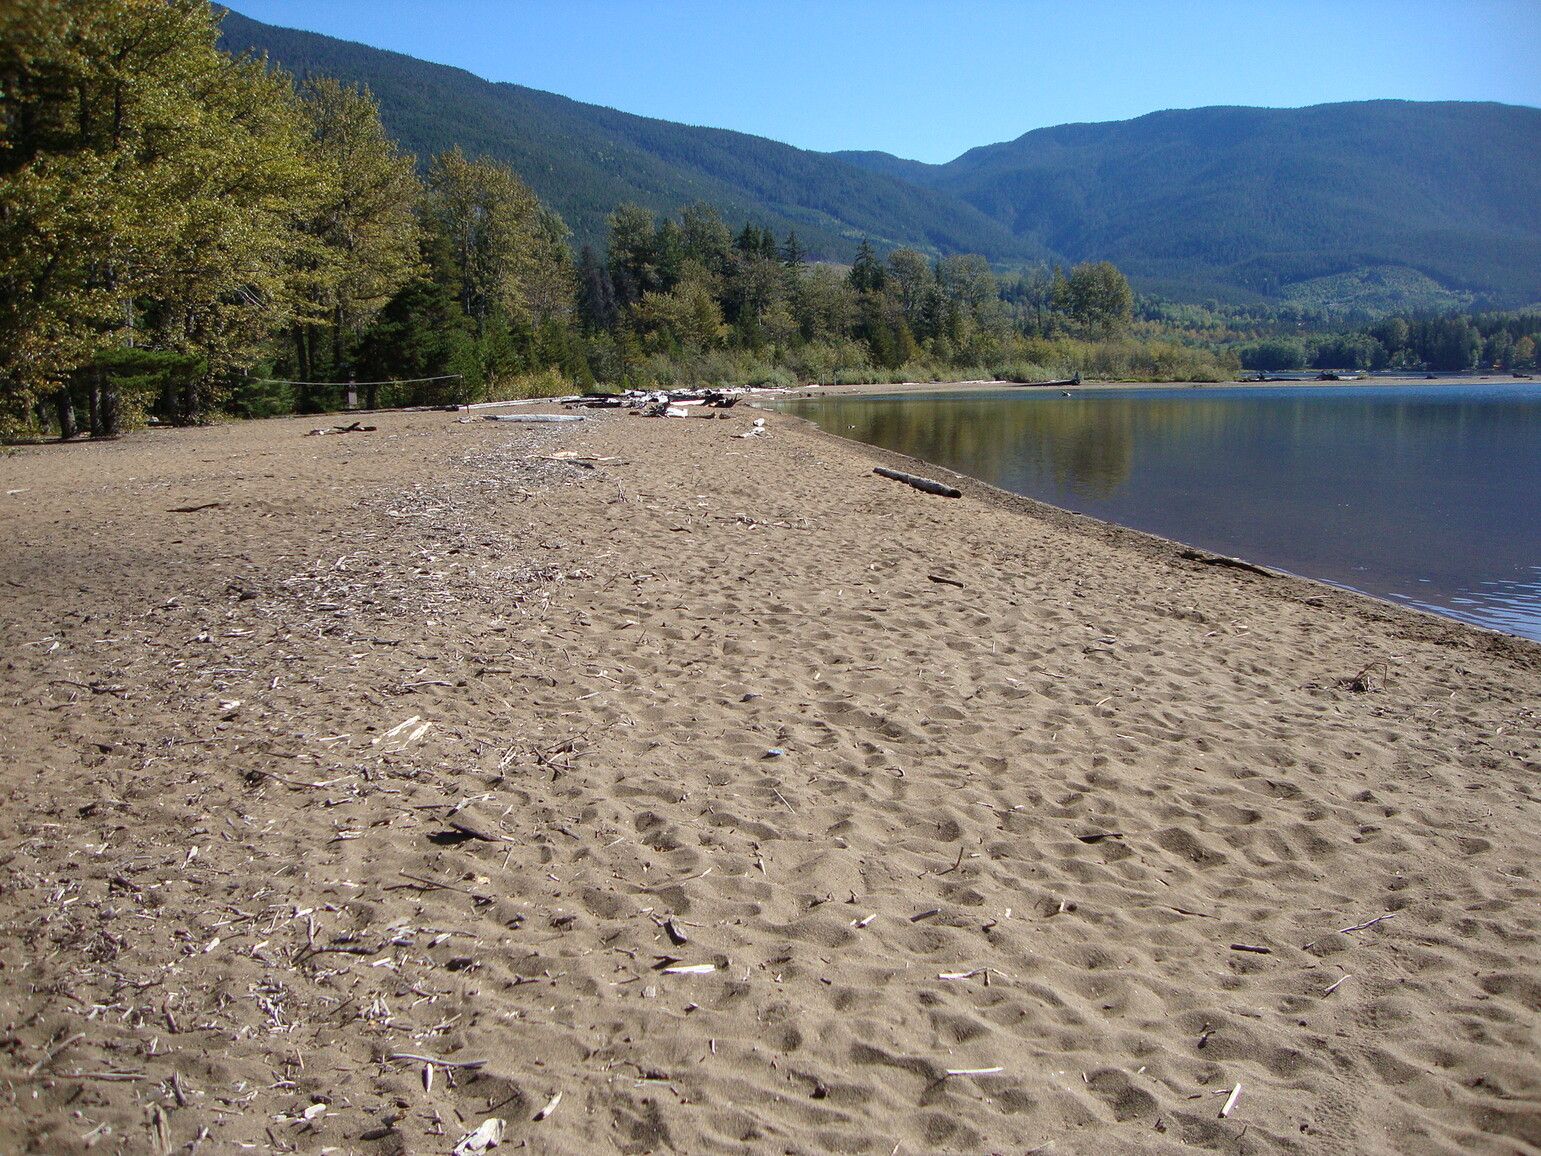 The sandy beach and a volleyball net await visitors. Gruchy's Beach, Lakelse Lake Park.